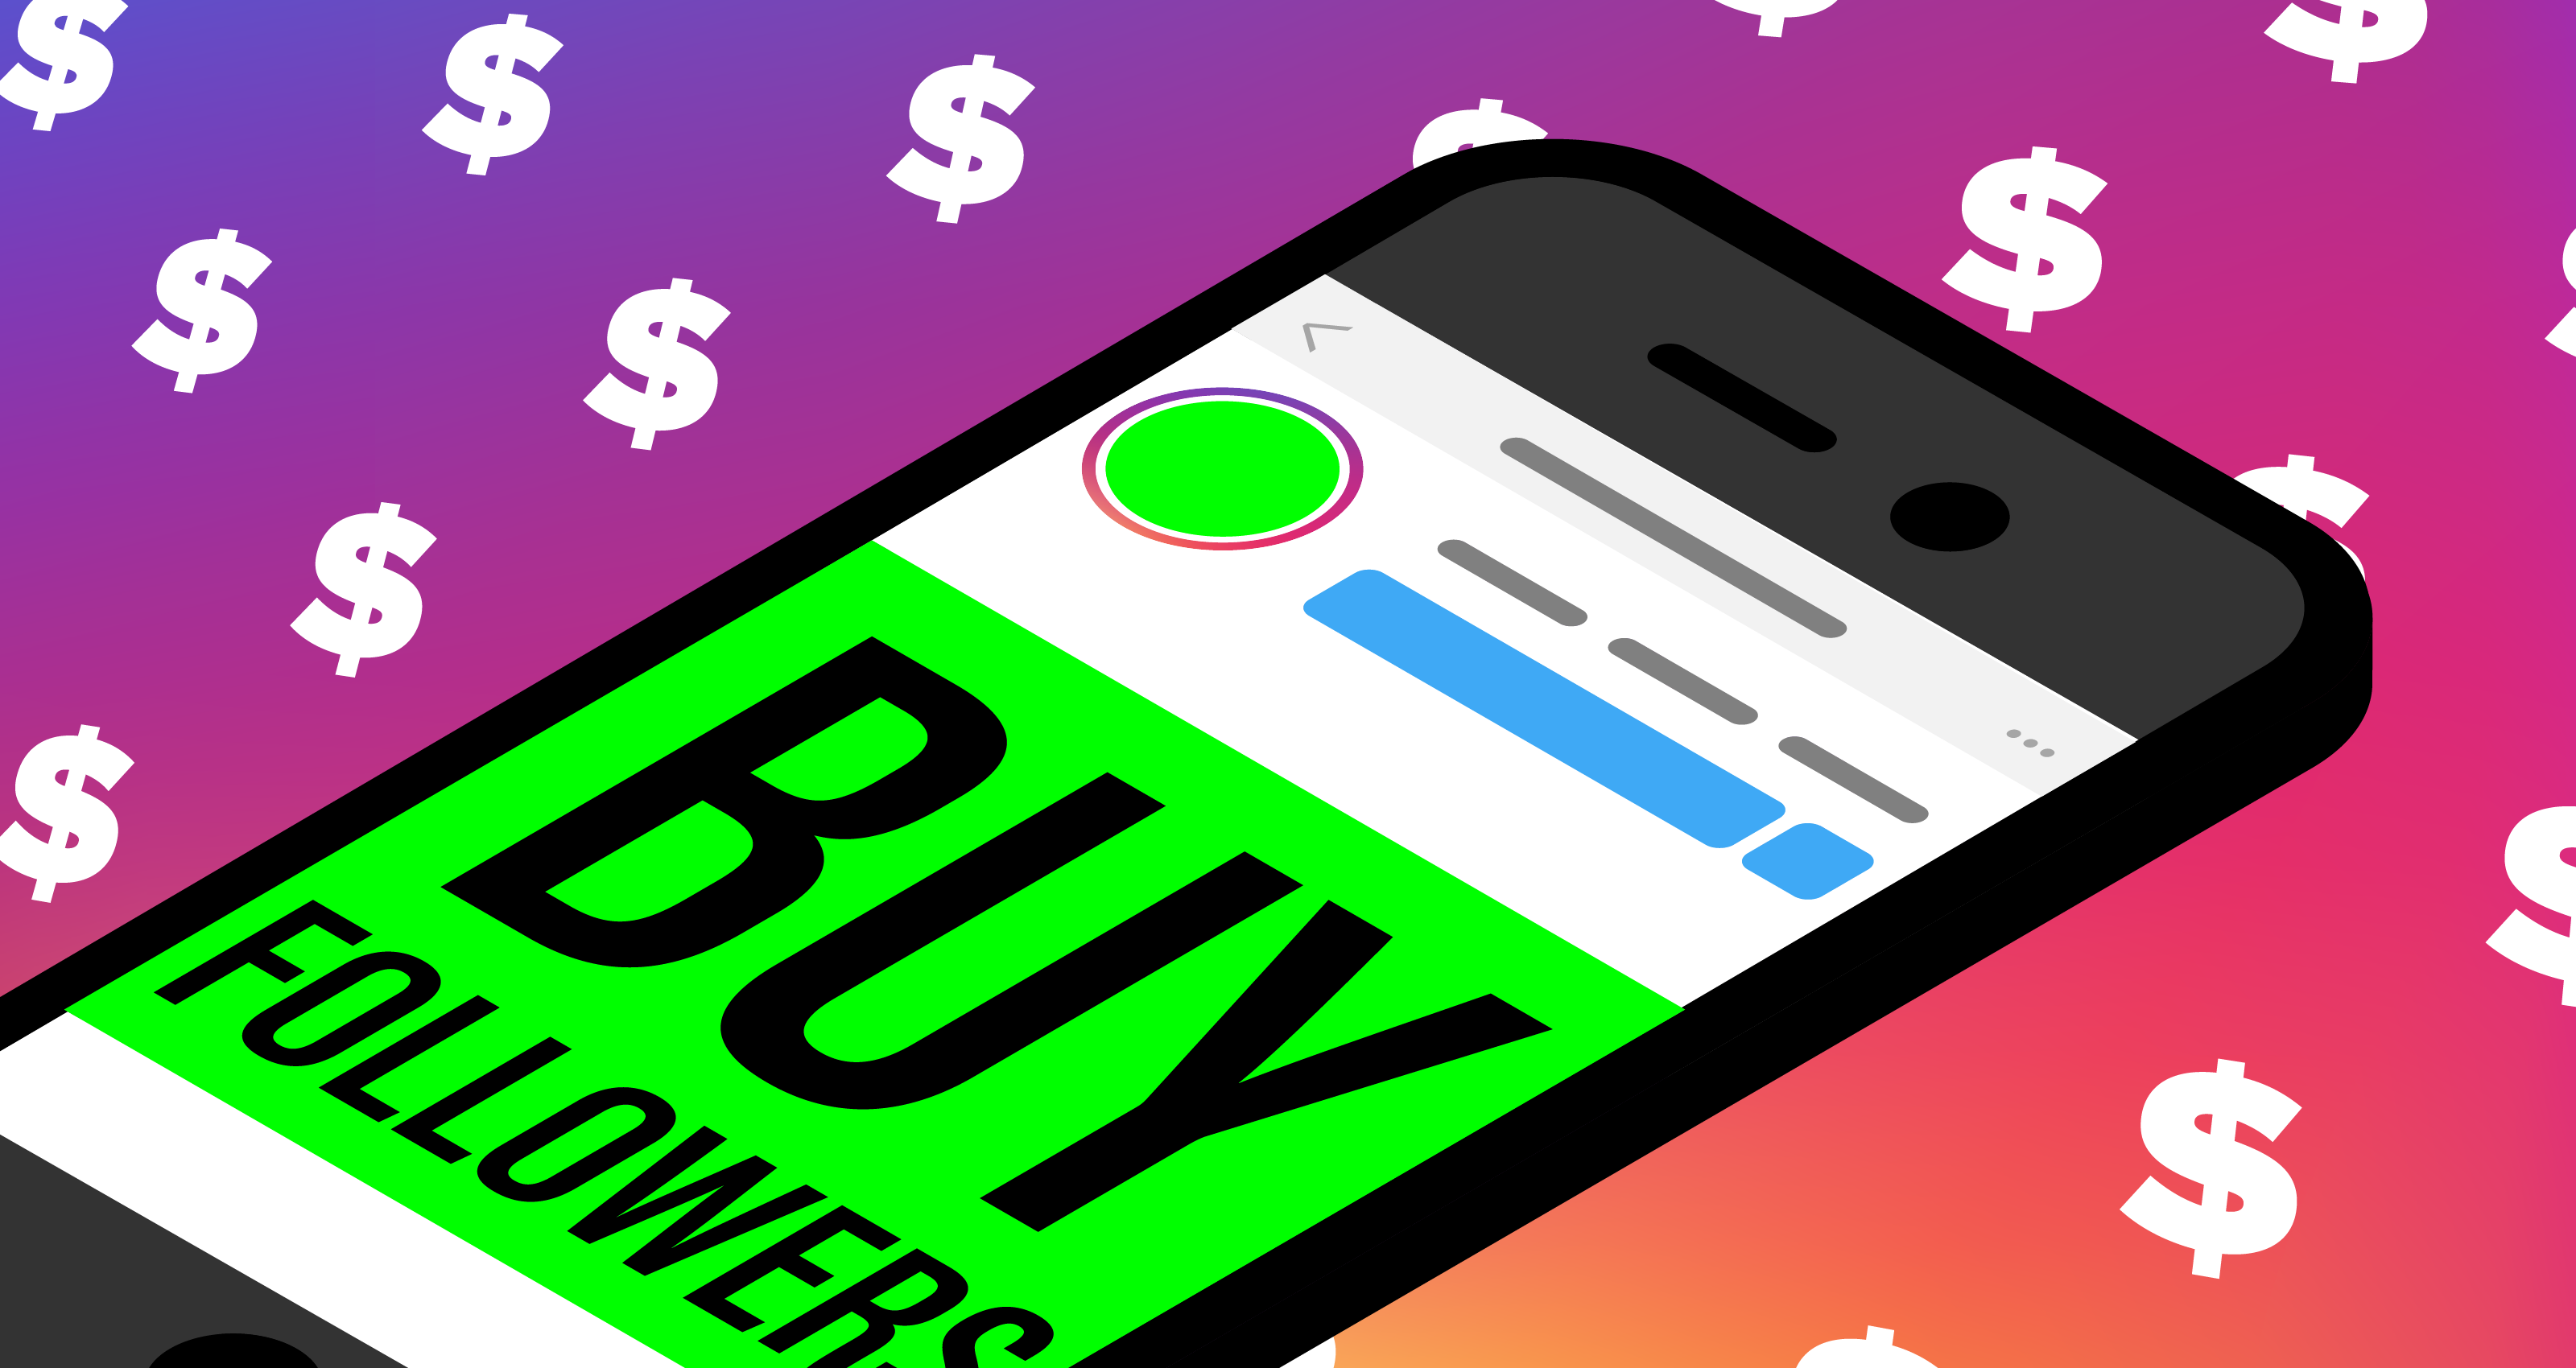 Instagram caught selling ads to follower-buying services it banned | TechCrunch